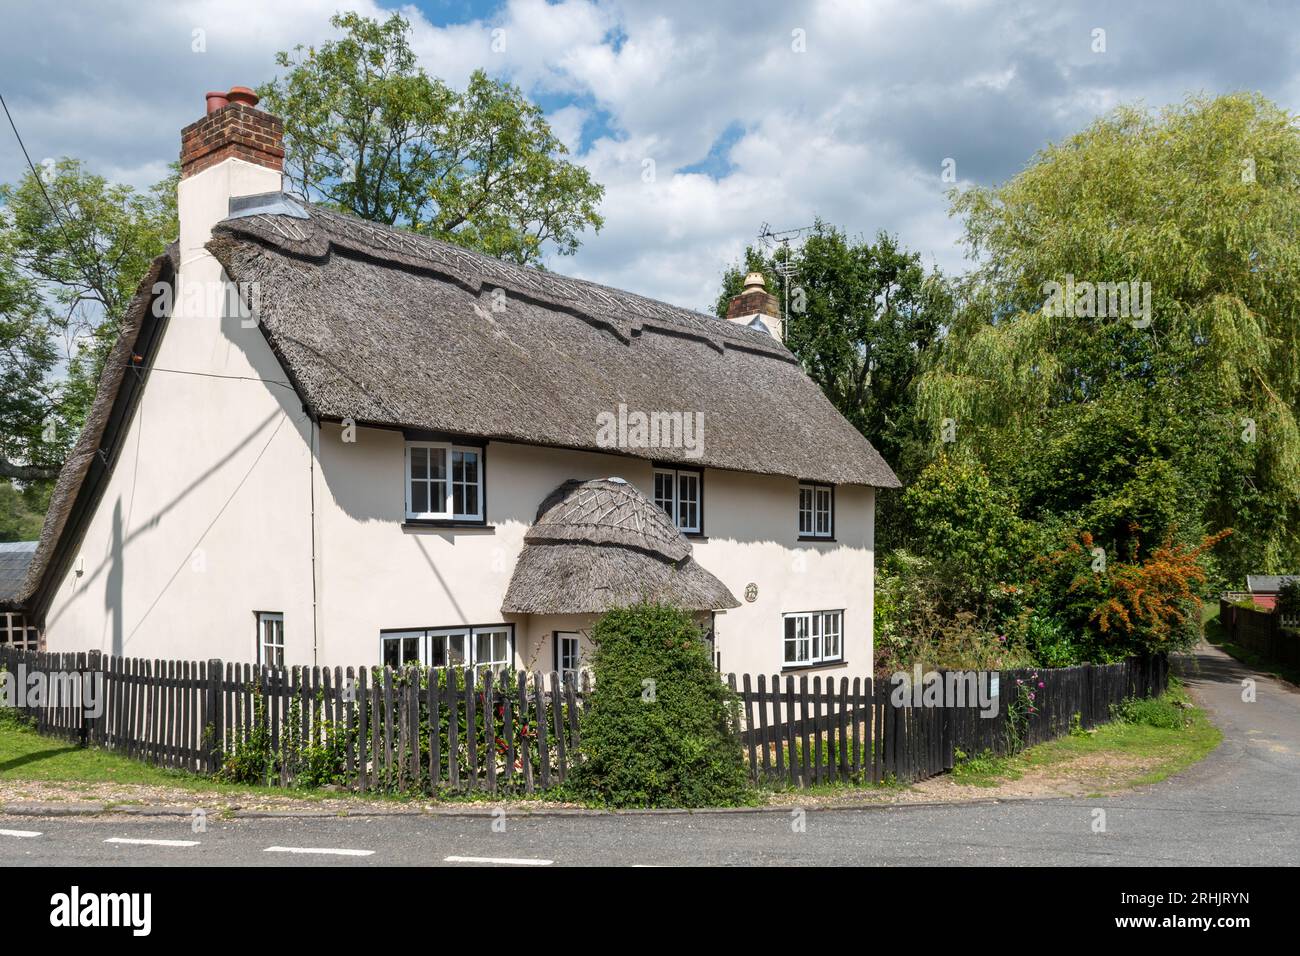 Pretty thatched cottage in Minstead, a village in the New Forest National Park, Hampshire, England, UK Stock Photo